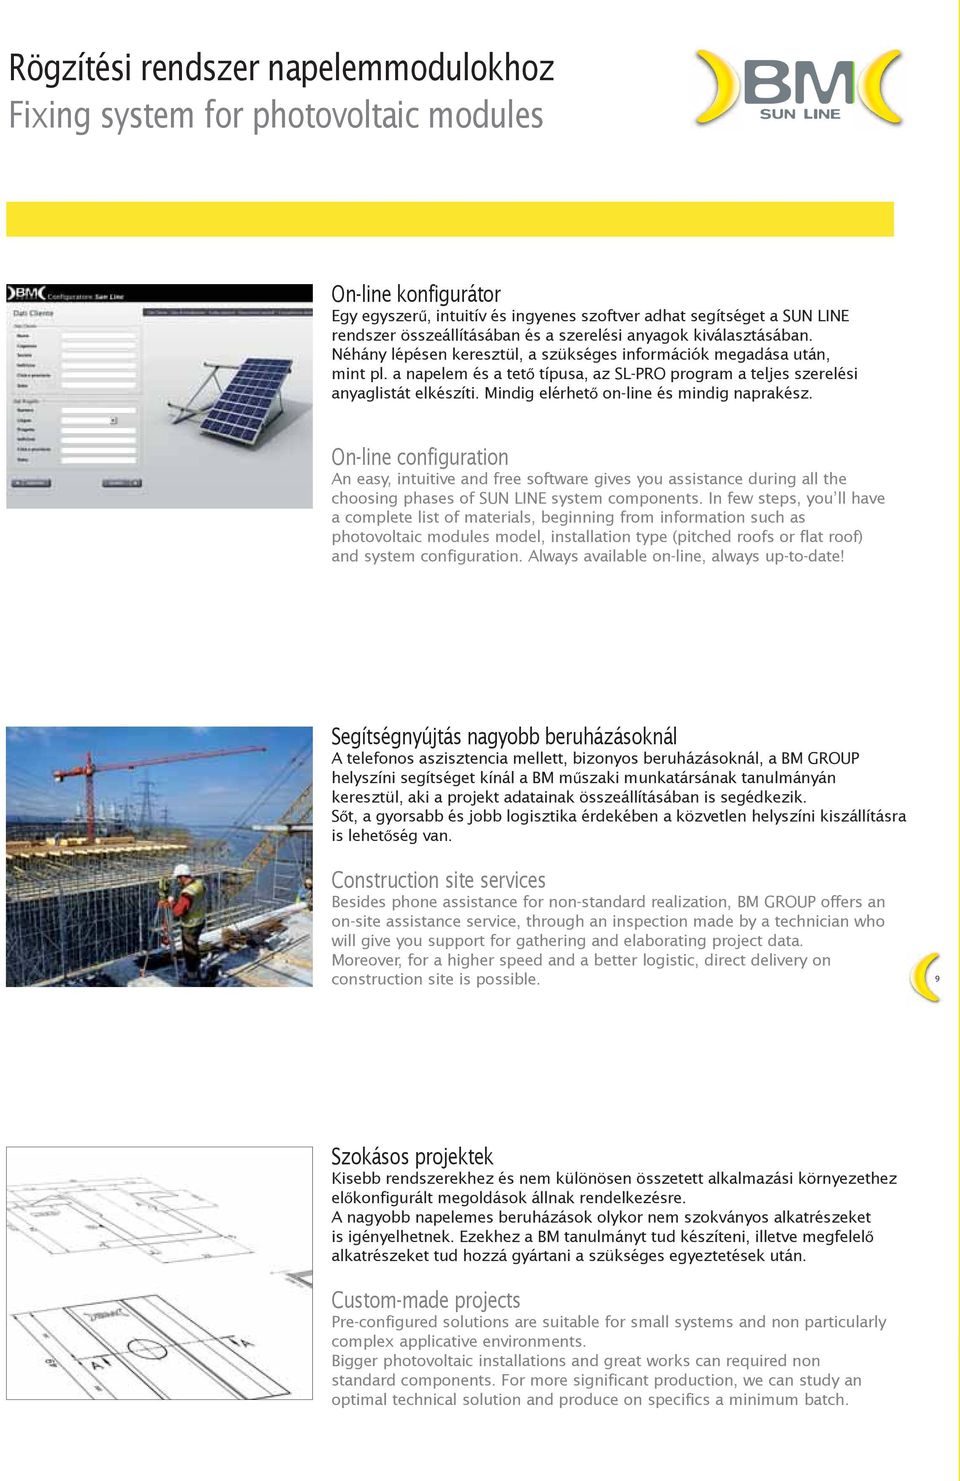 Mindig elérhető on-line és mindig naprakész. On-line configuration An easy, intuitive and free software gives you assistance during all the choosing phases of SUN LINE system components.